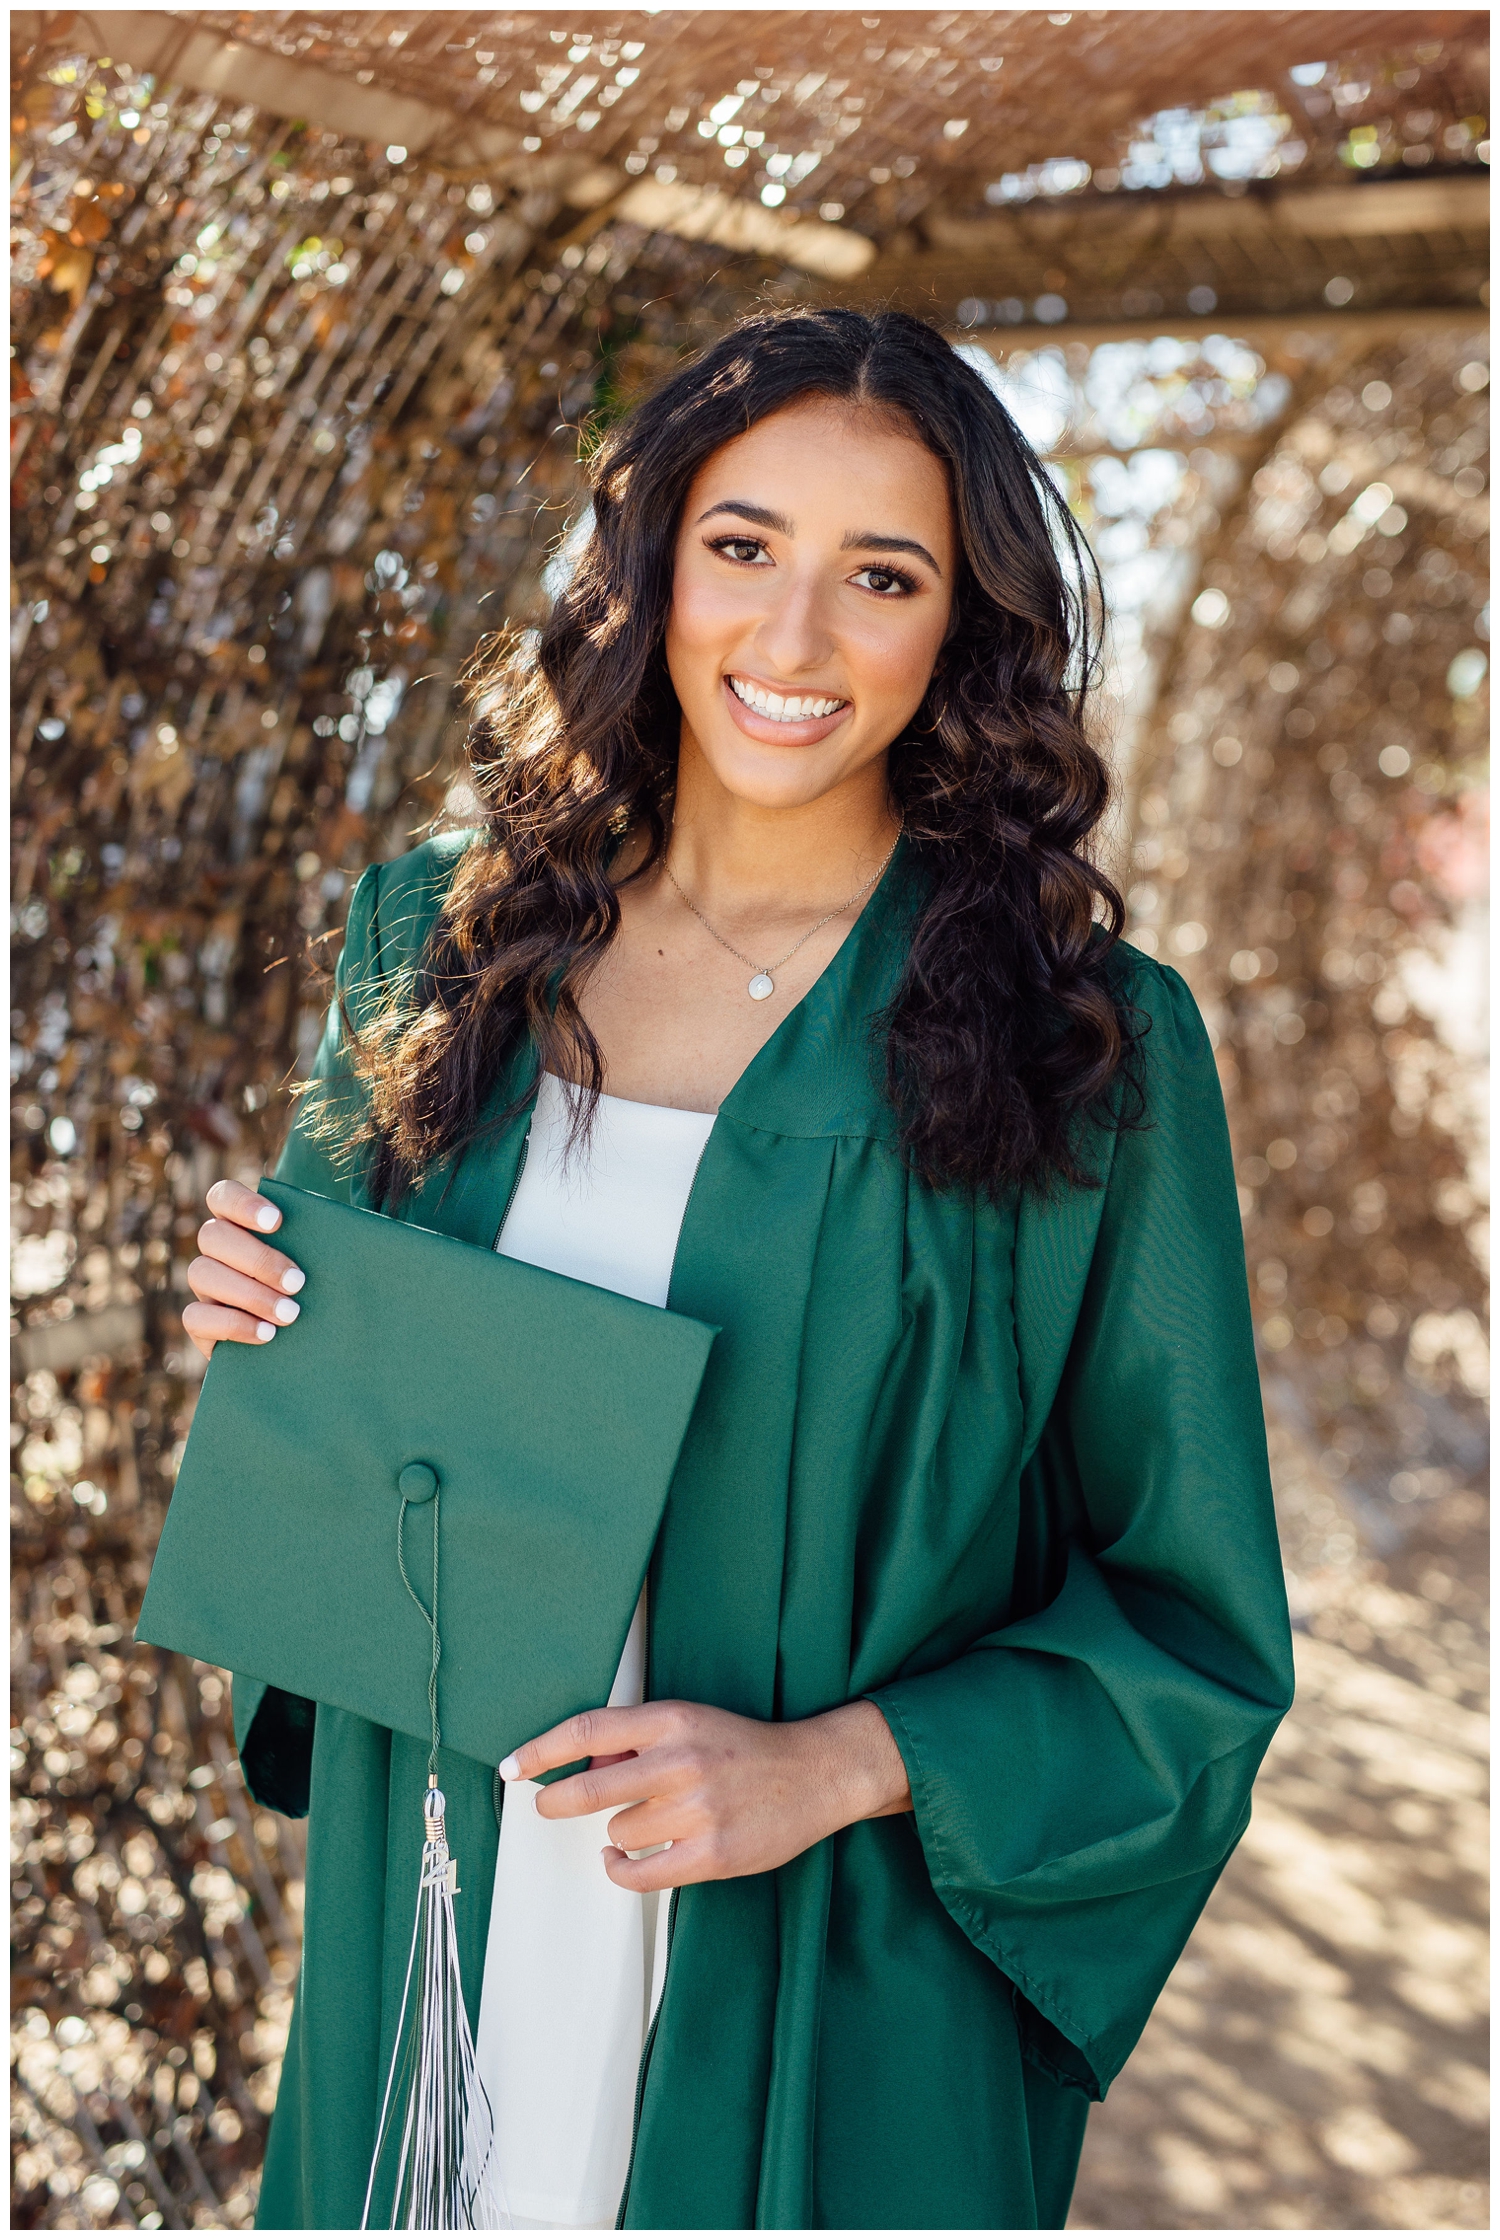 girl in cap and gown smiling